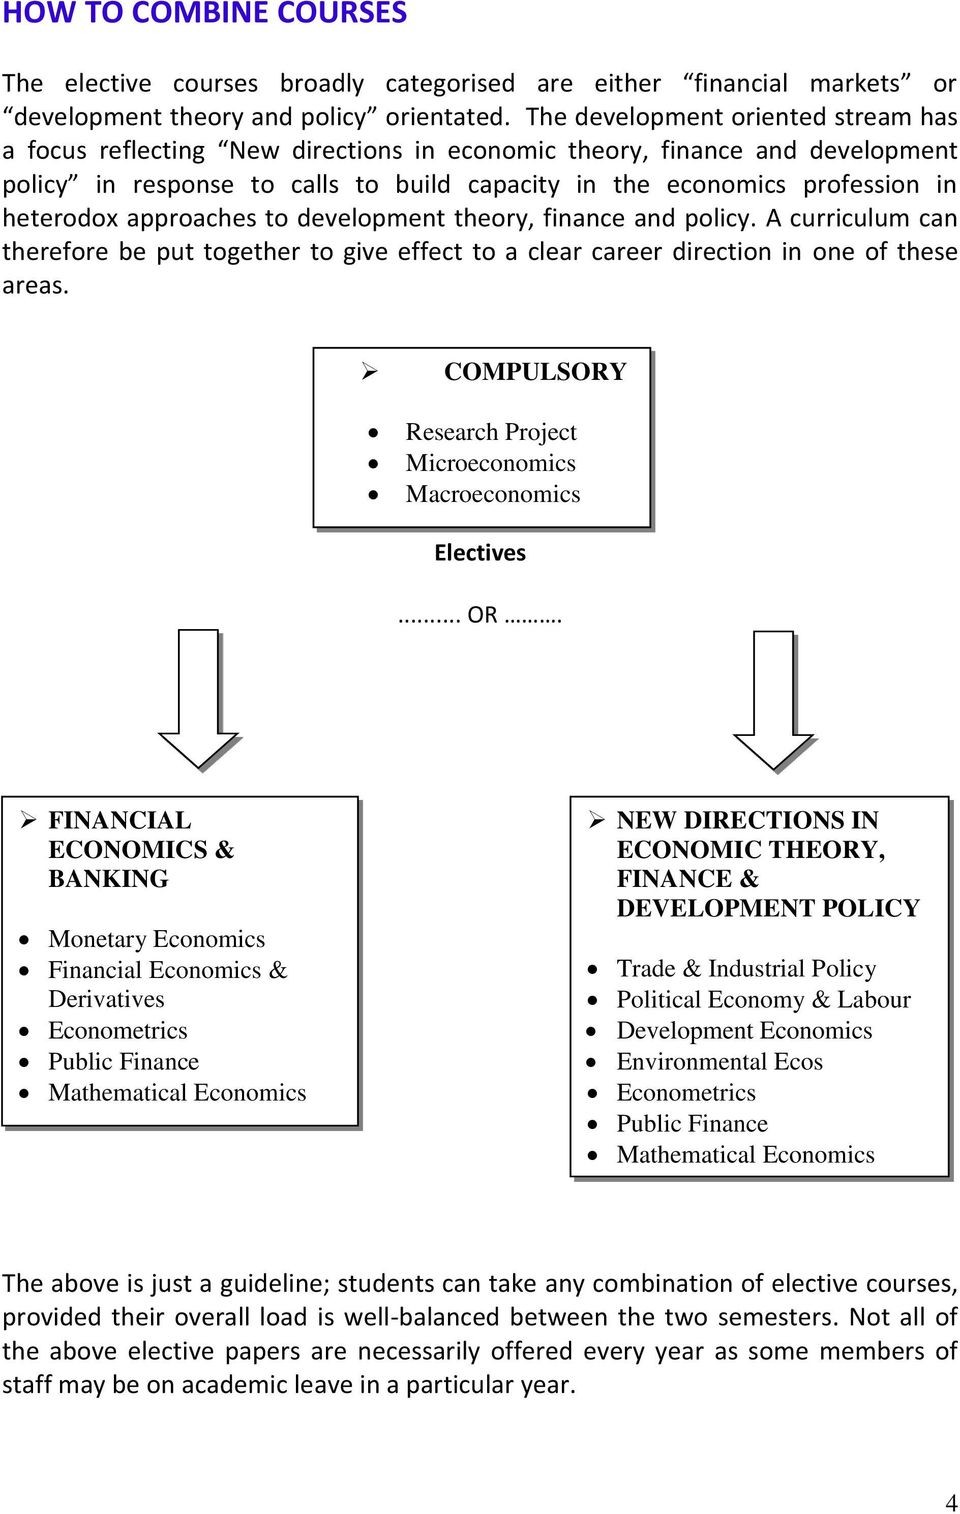 heterodox approaches to development theory, finance and policy. A curriculum can therefore be put together to give effect to a clear career direction in one of these areas.